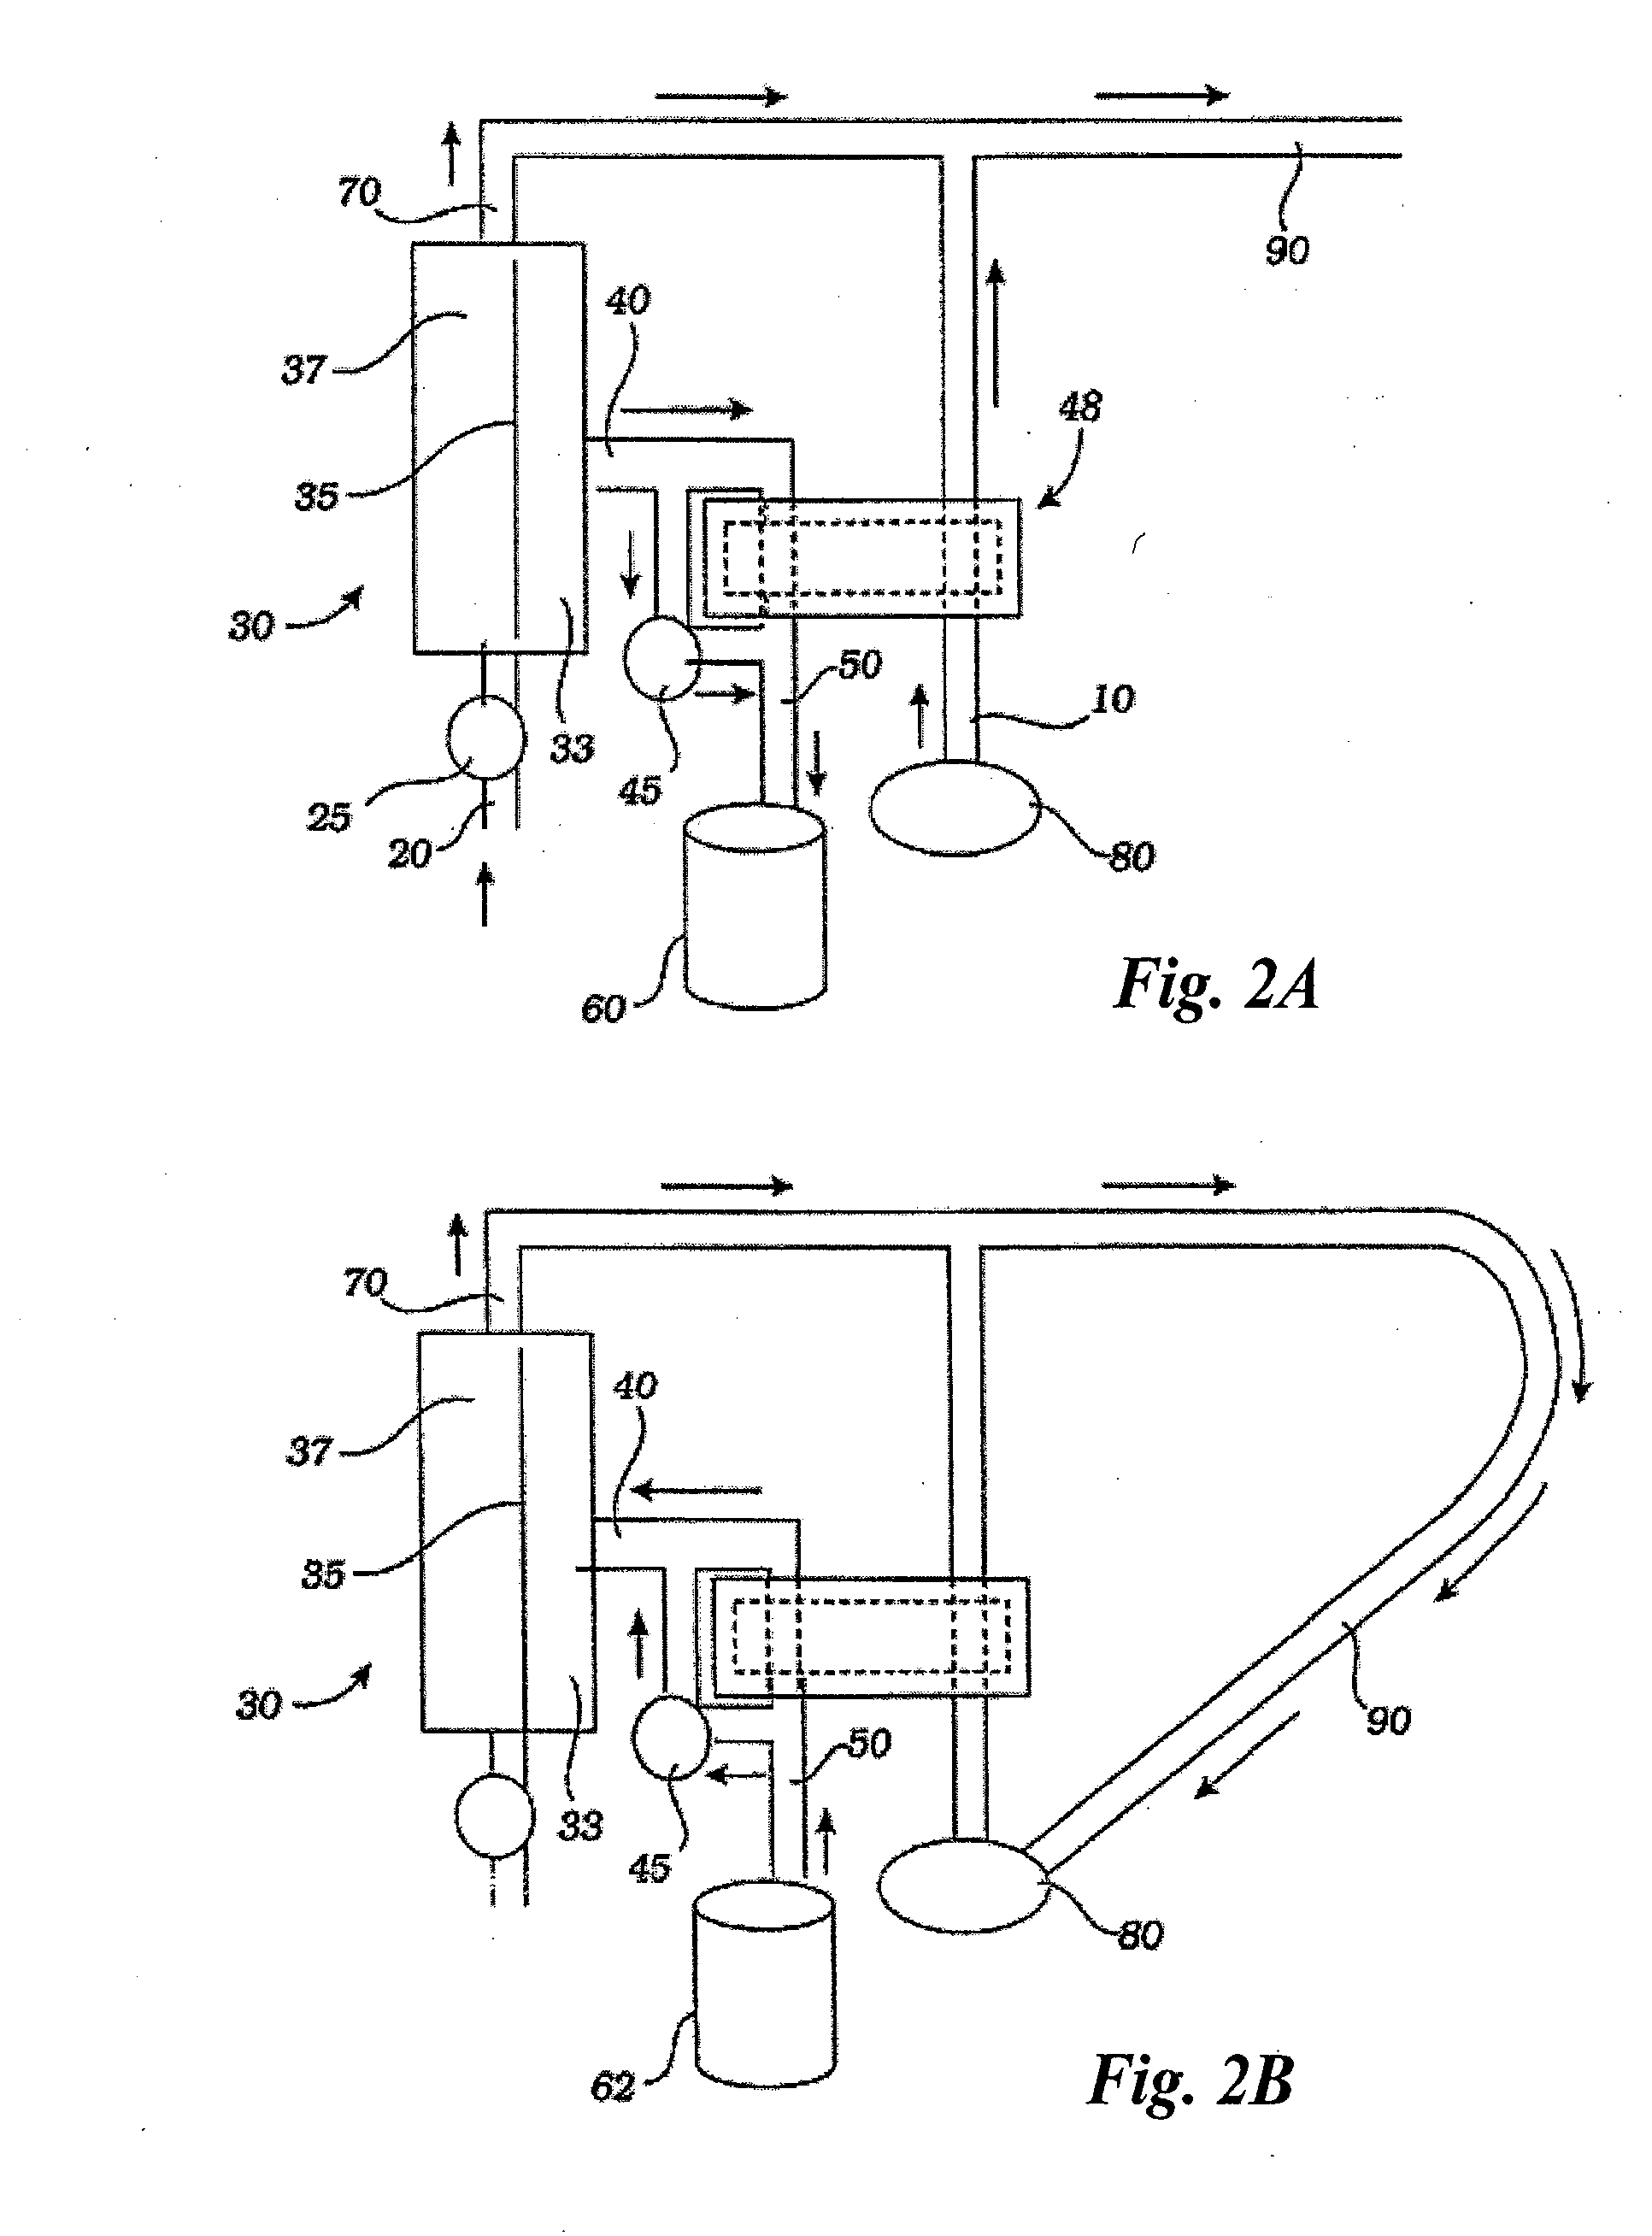 Fluid, circuits, systems, and processes for extracorporeal blood processing